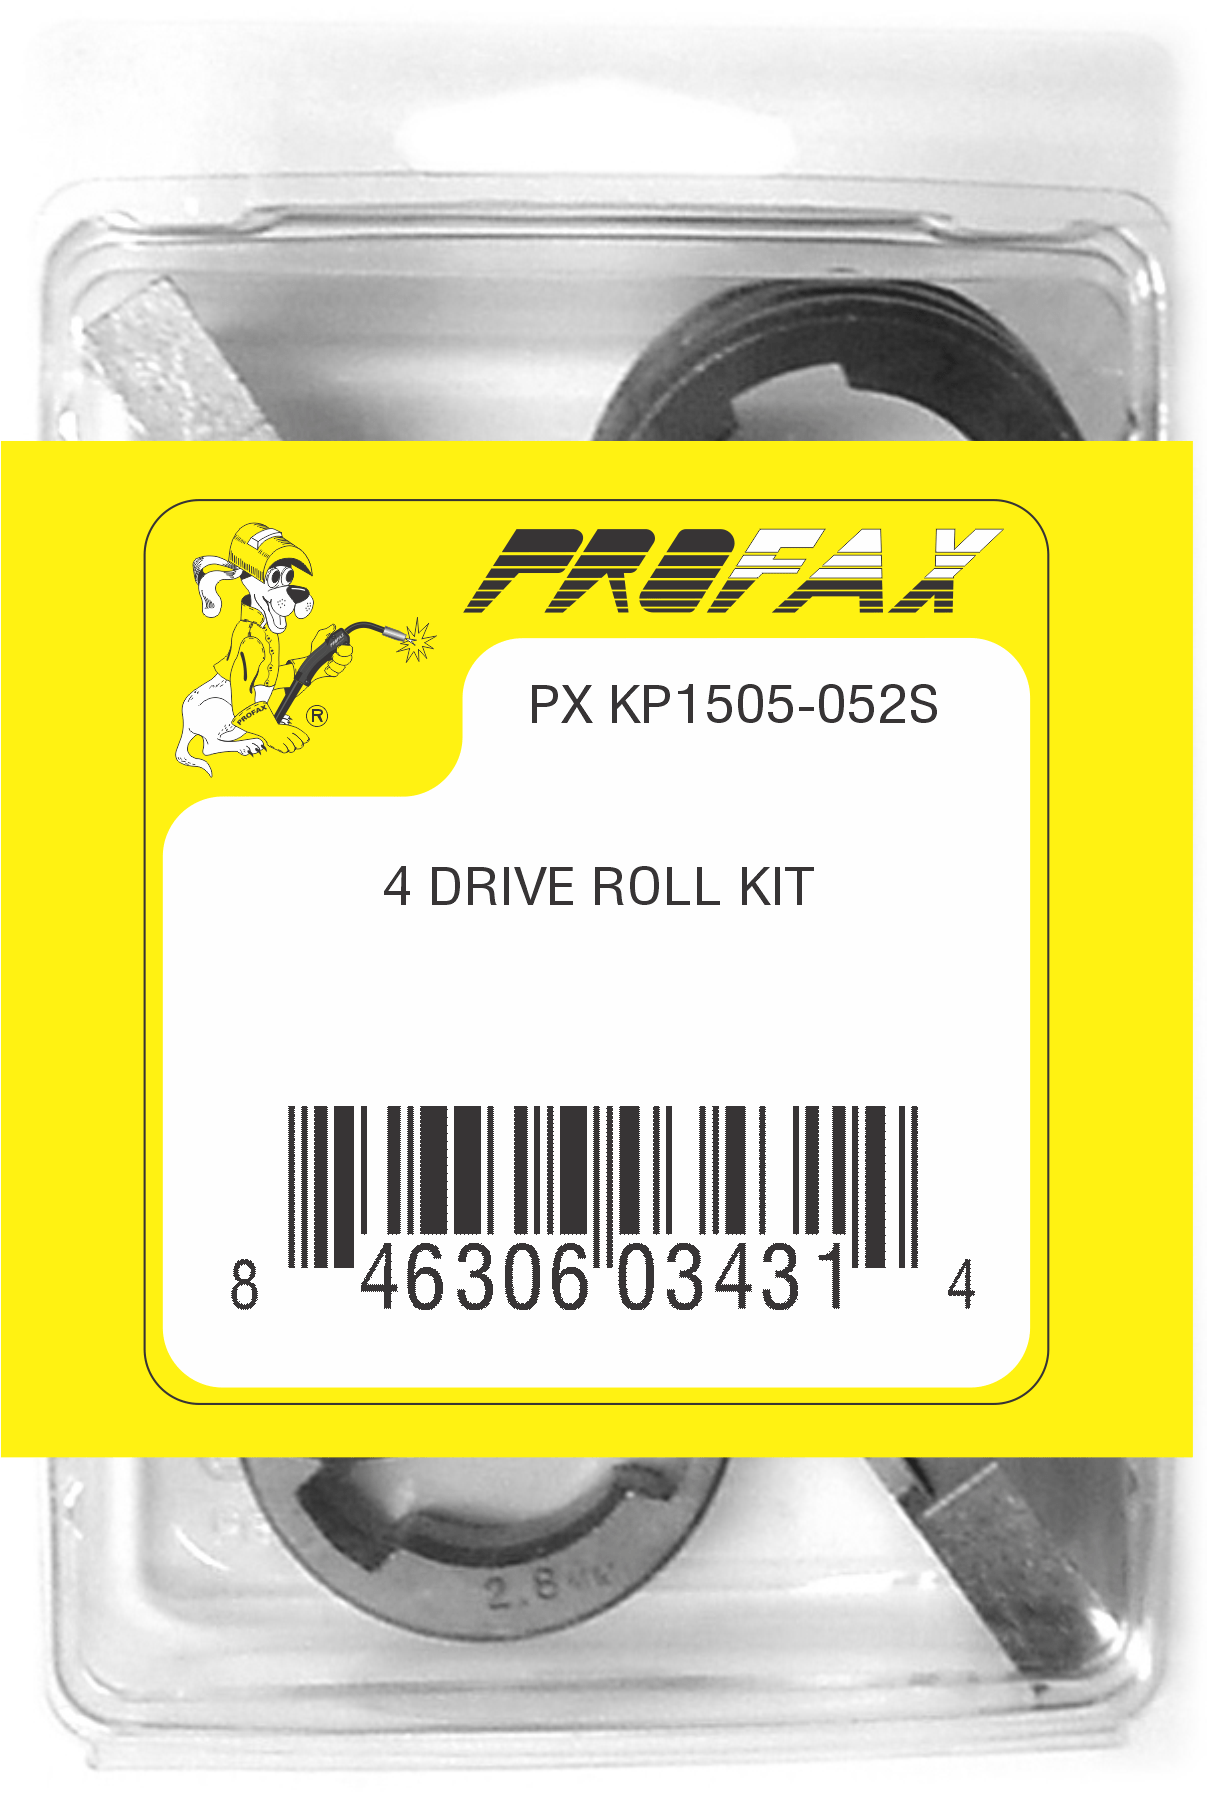 Profax Consumables Lincoln Drive Roll Kit .052 Solid 4 Roll (KP1505-052S)